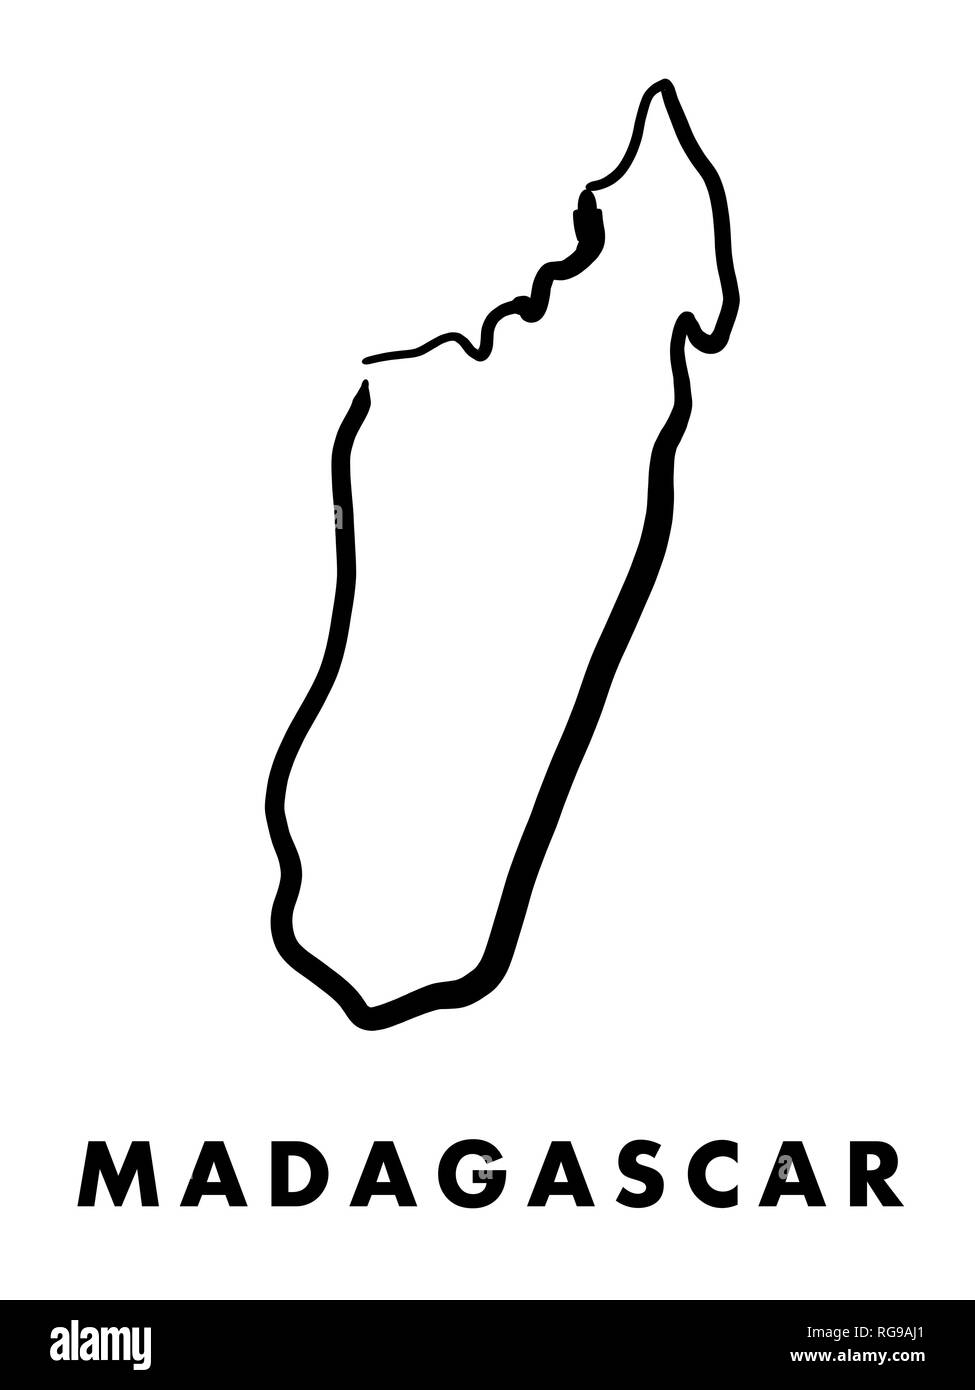 Madagascar simple map outline - smooth simplified country shape map vector. Stock Vector